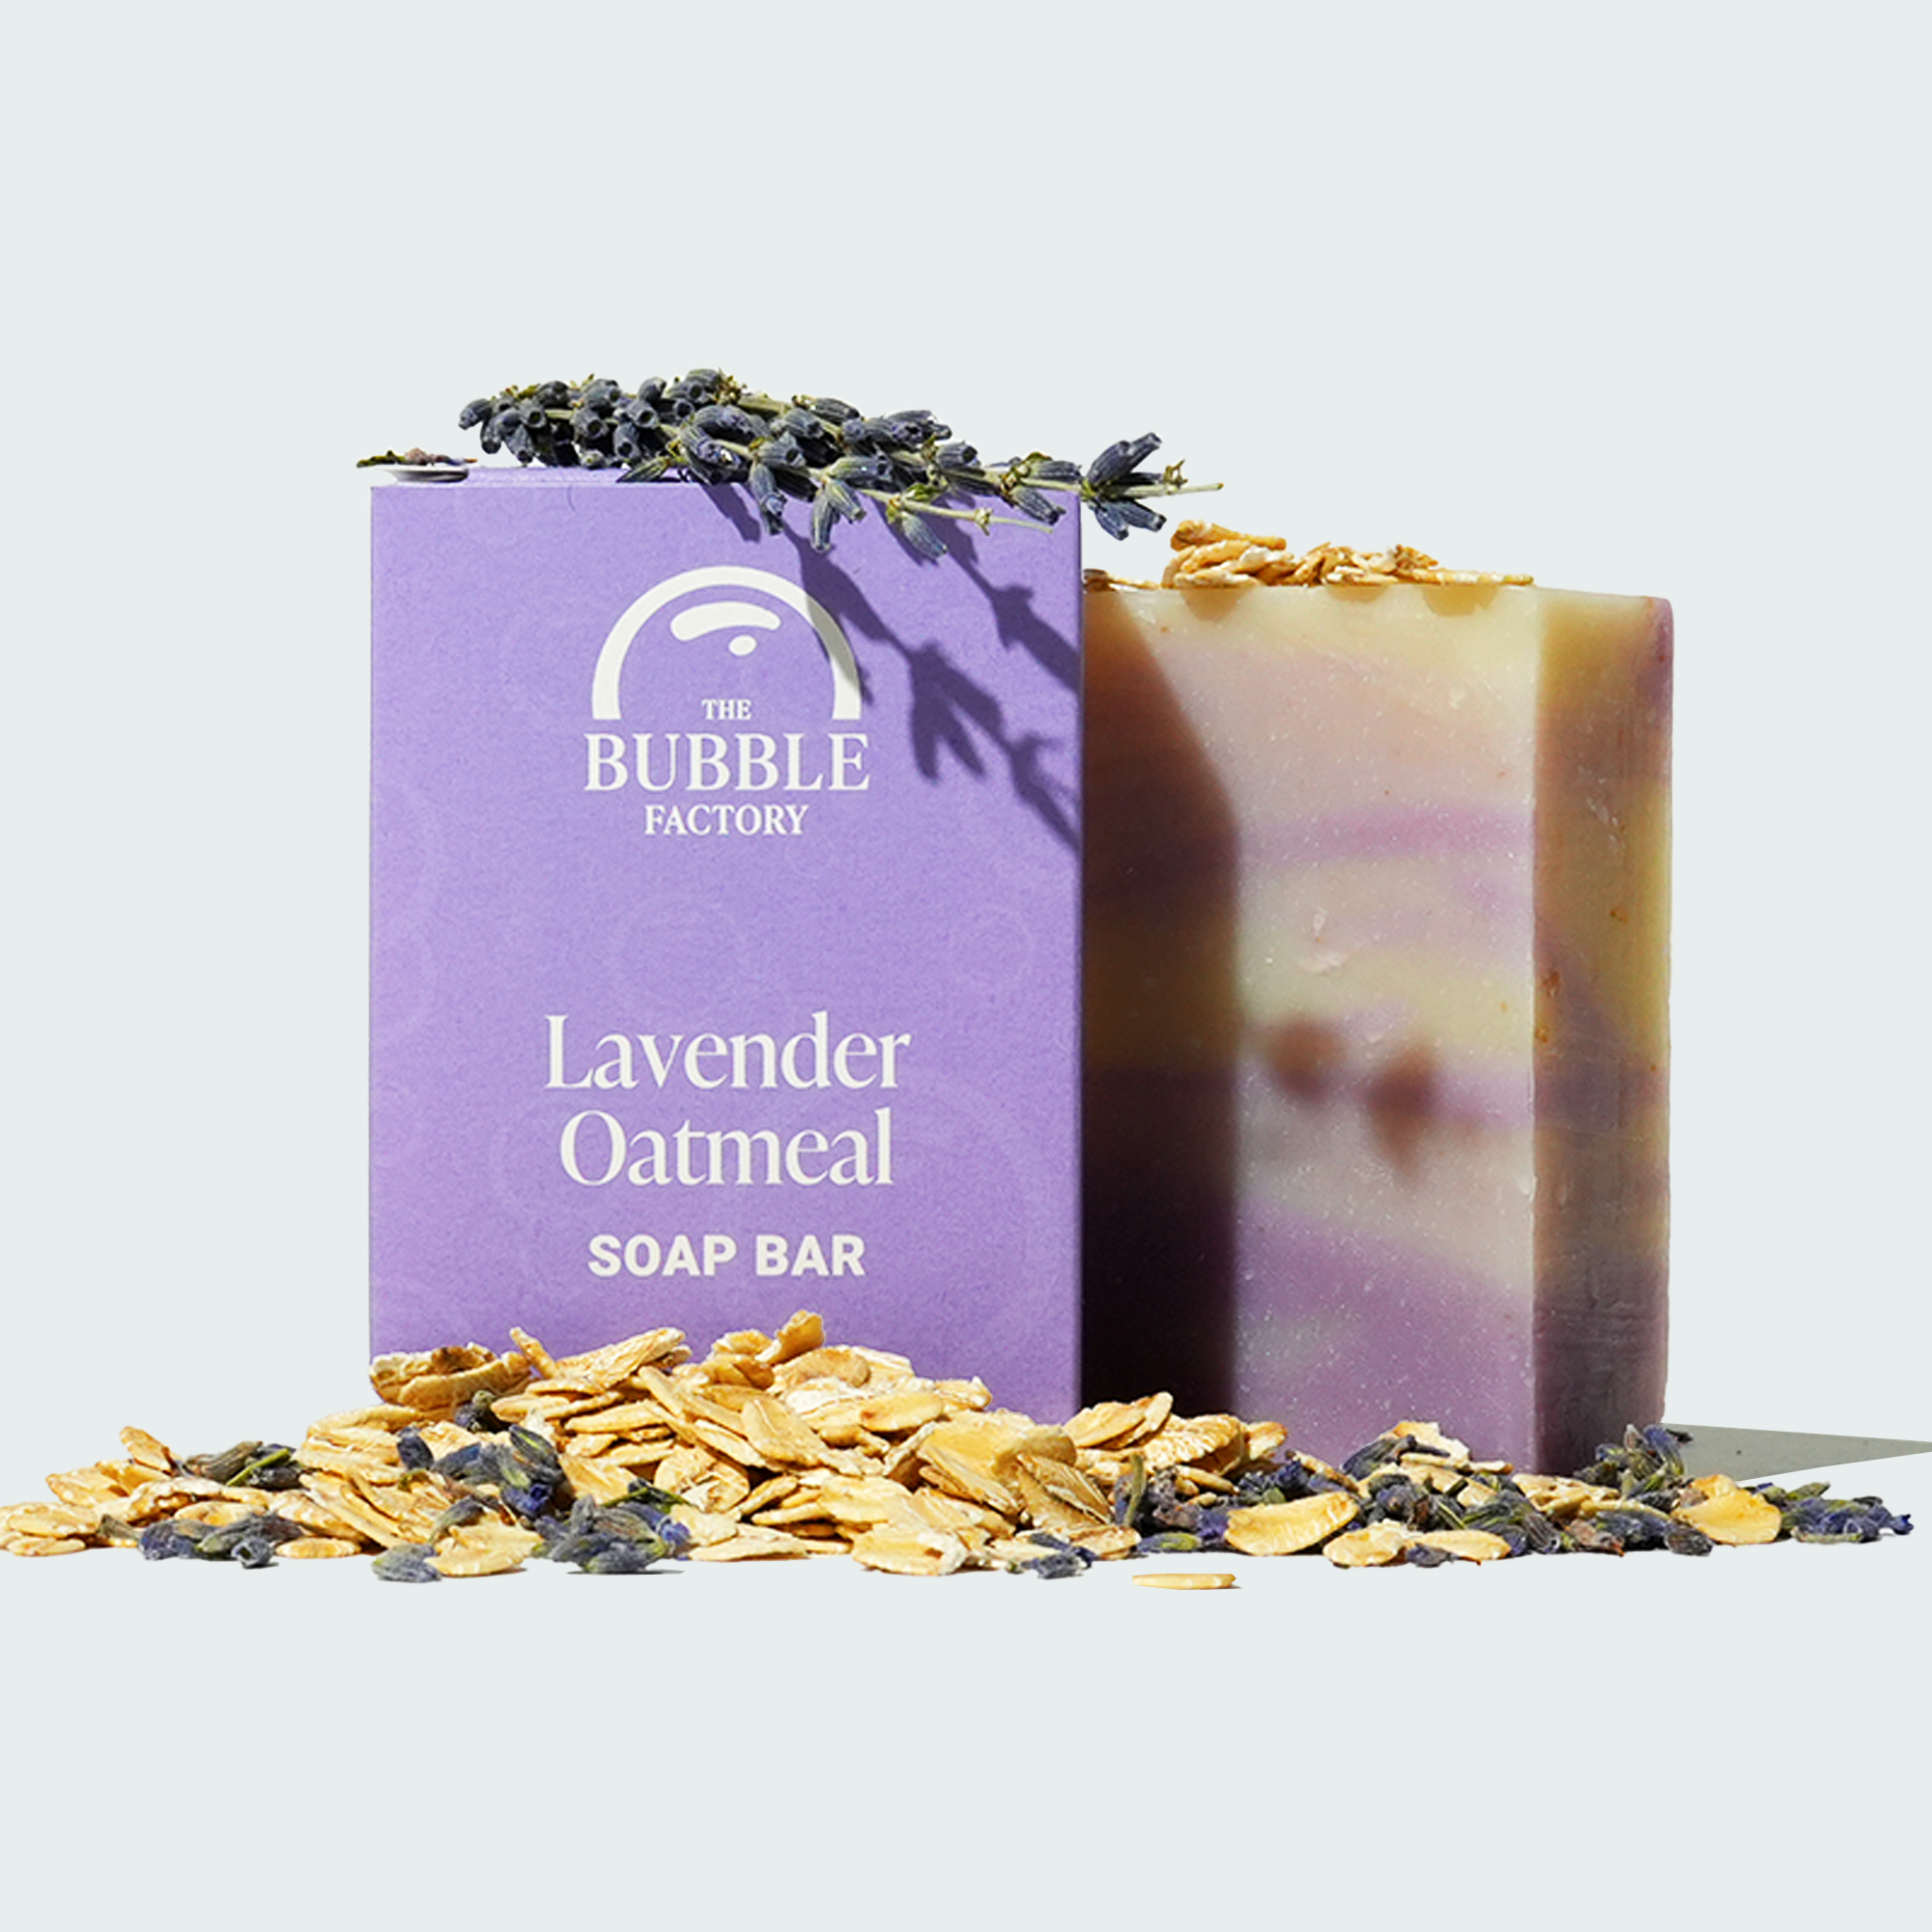 The His & Hers Natural Soap Bundle